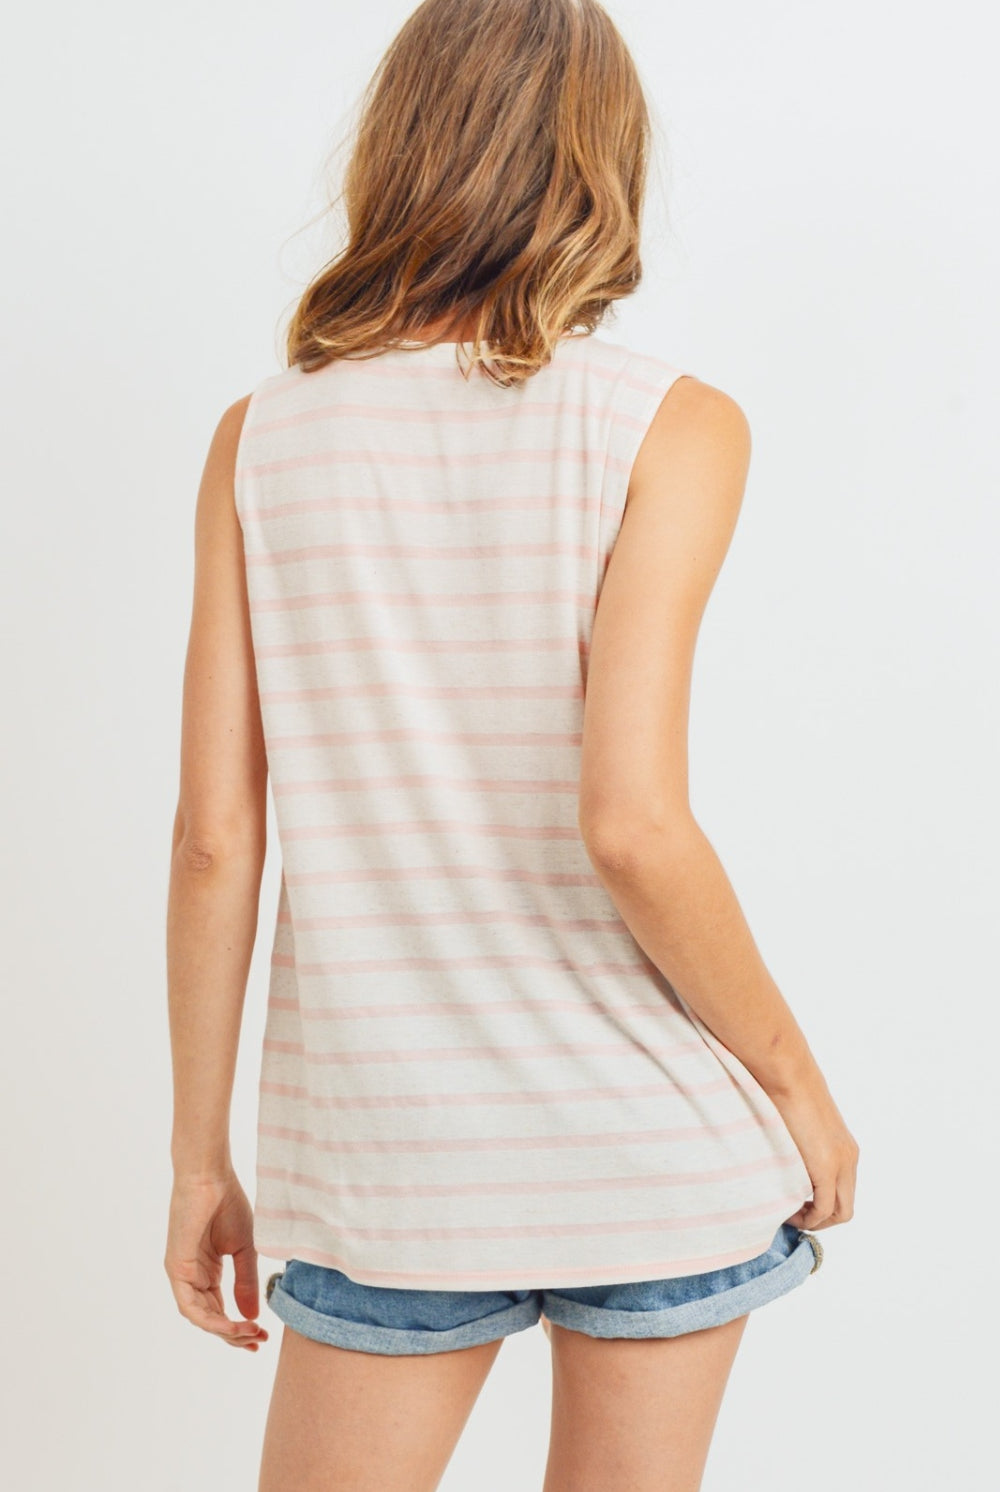 A woman in a coral and white striped sleeveless cotton top with a front tie detail, pairing it casually with denim shorts for a relaxed and stylish summer look.